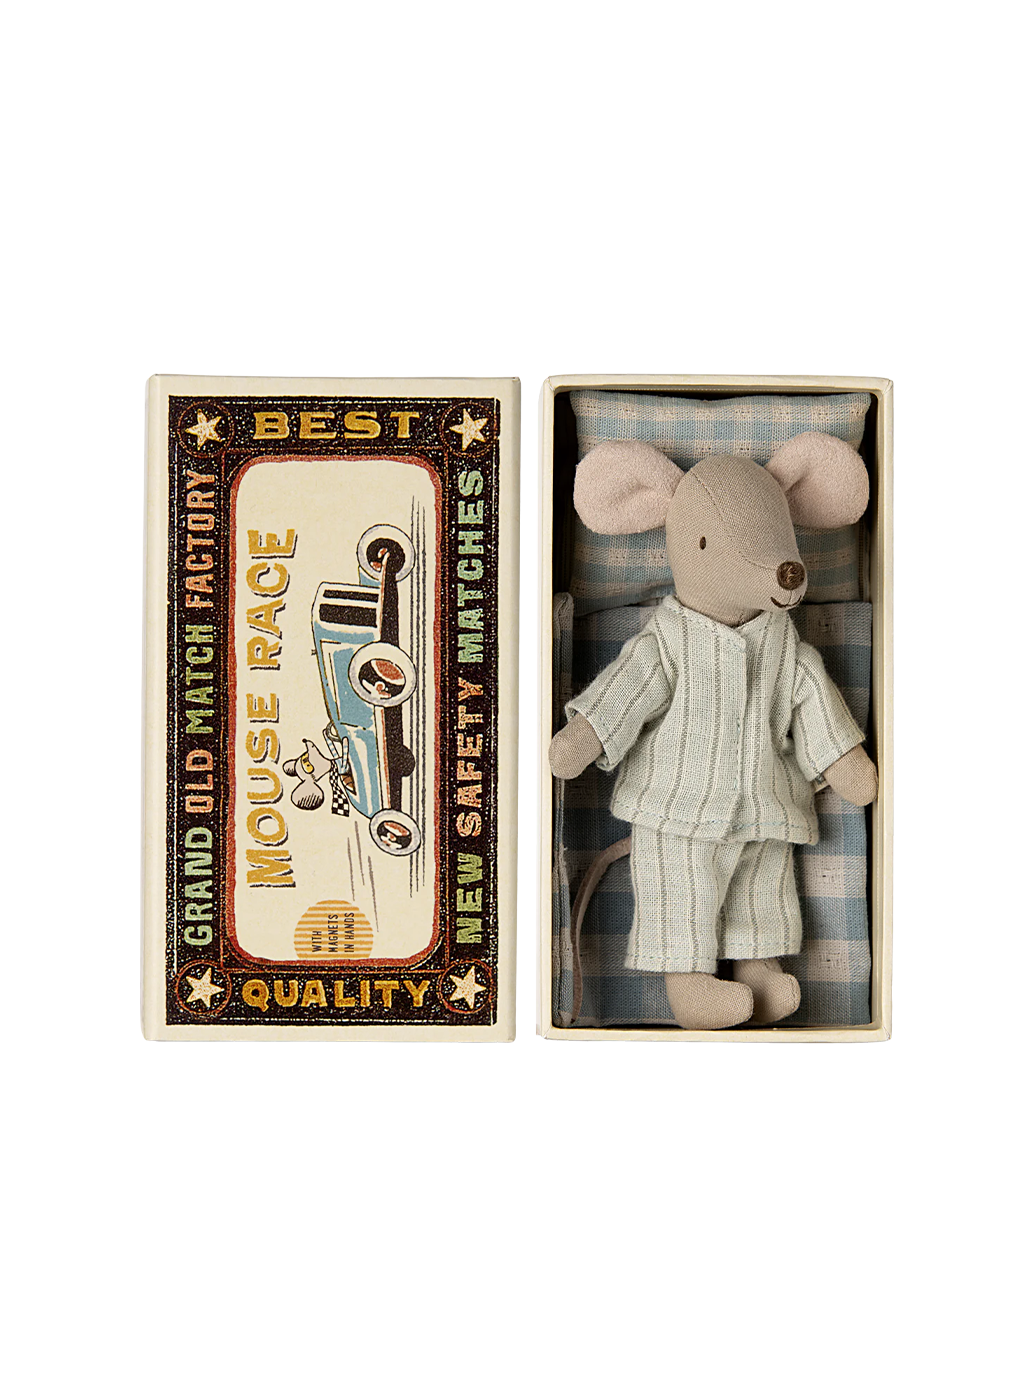 Little mouse in matchbox